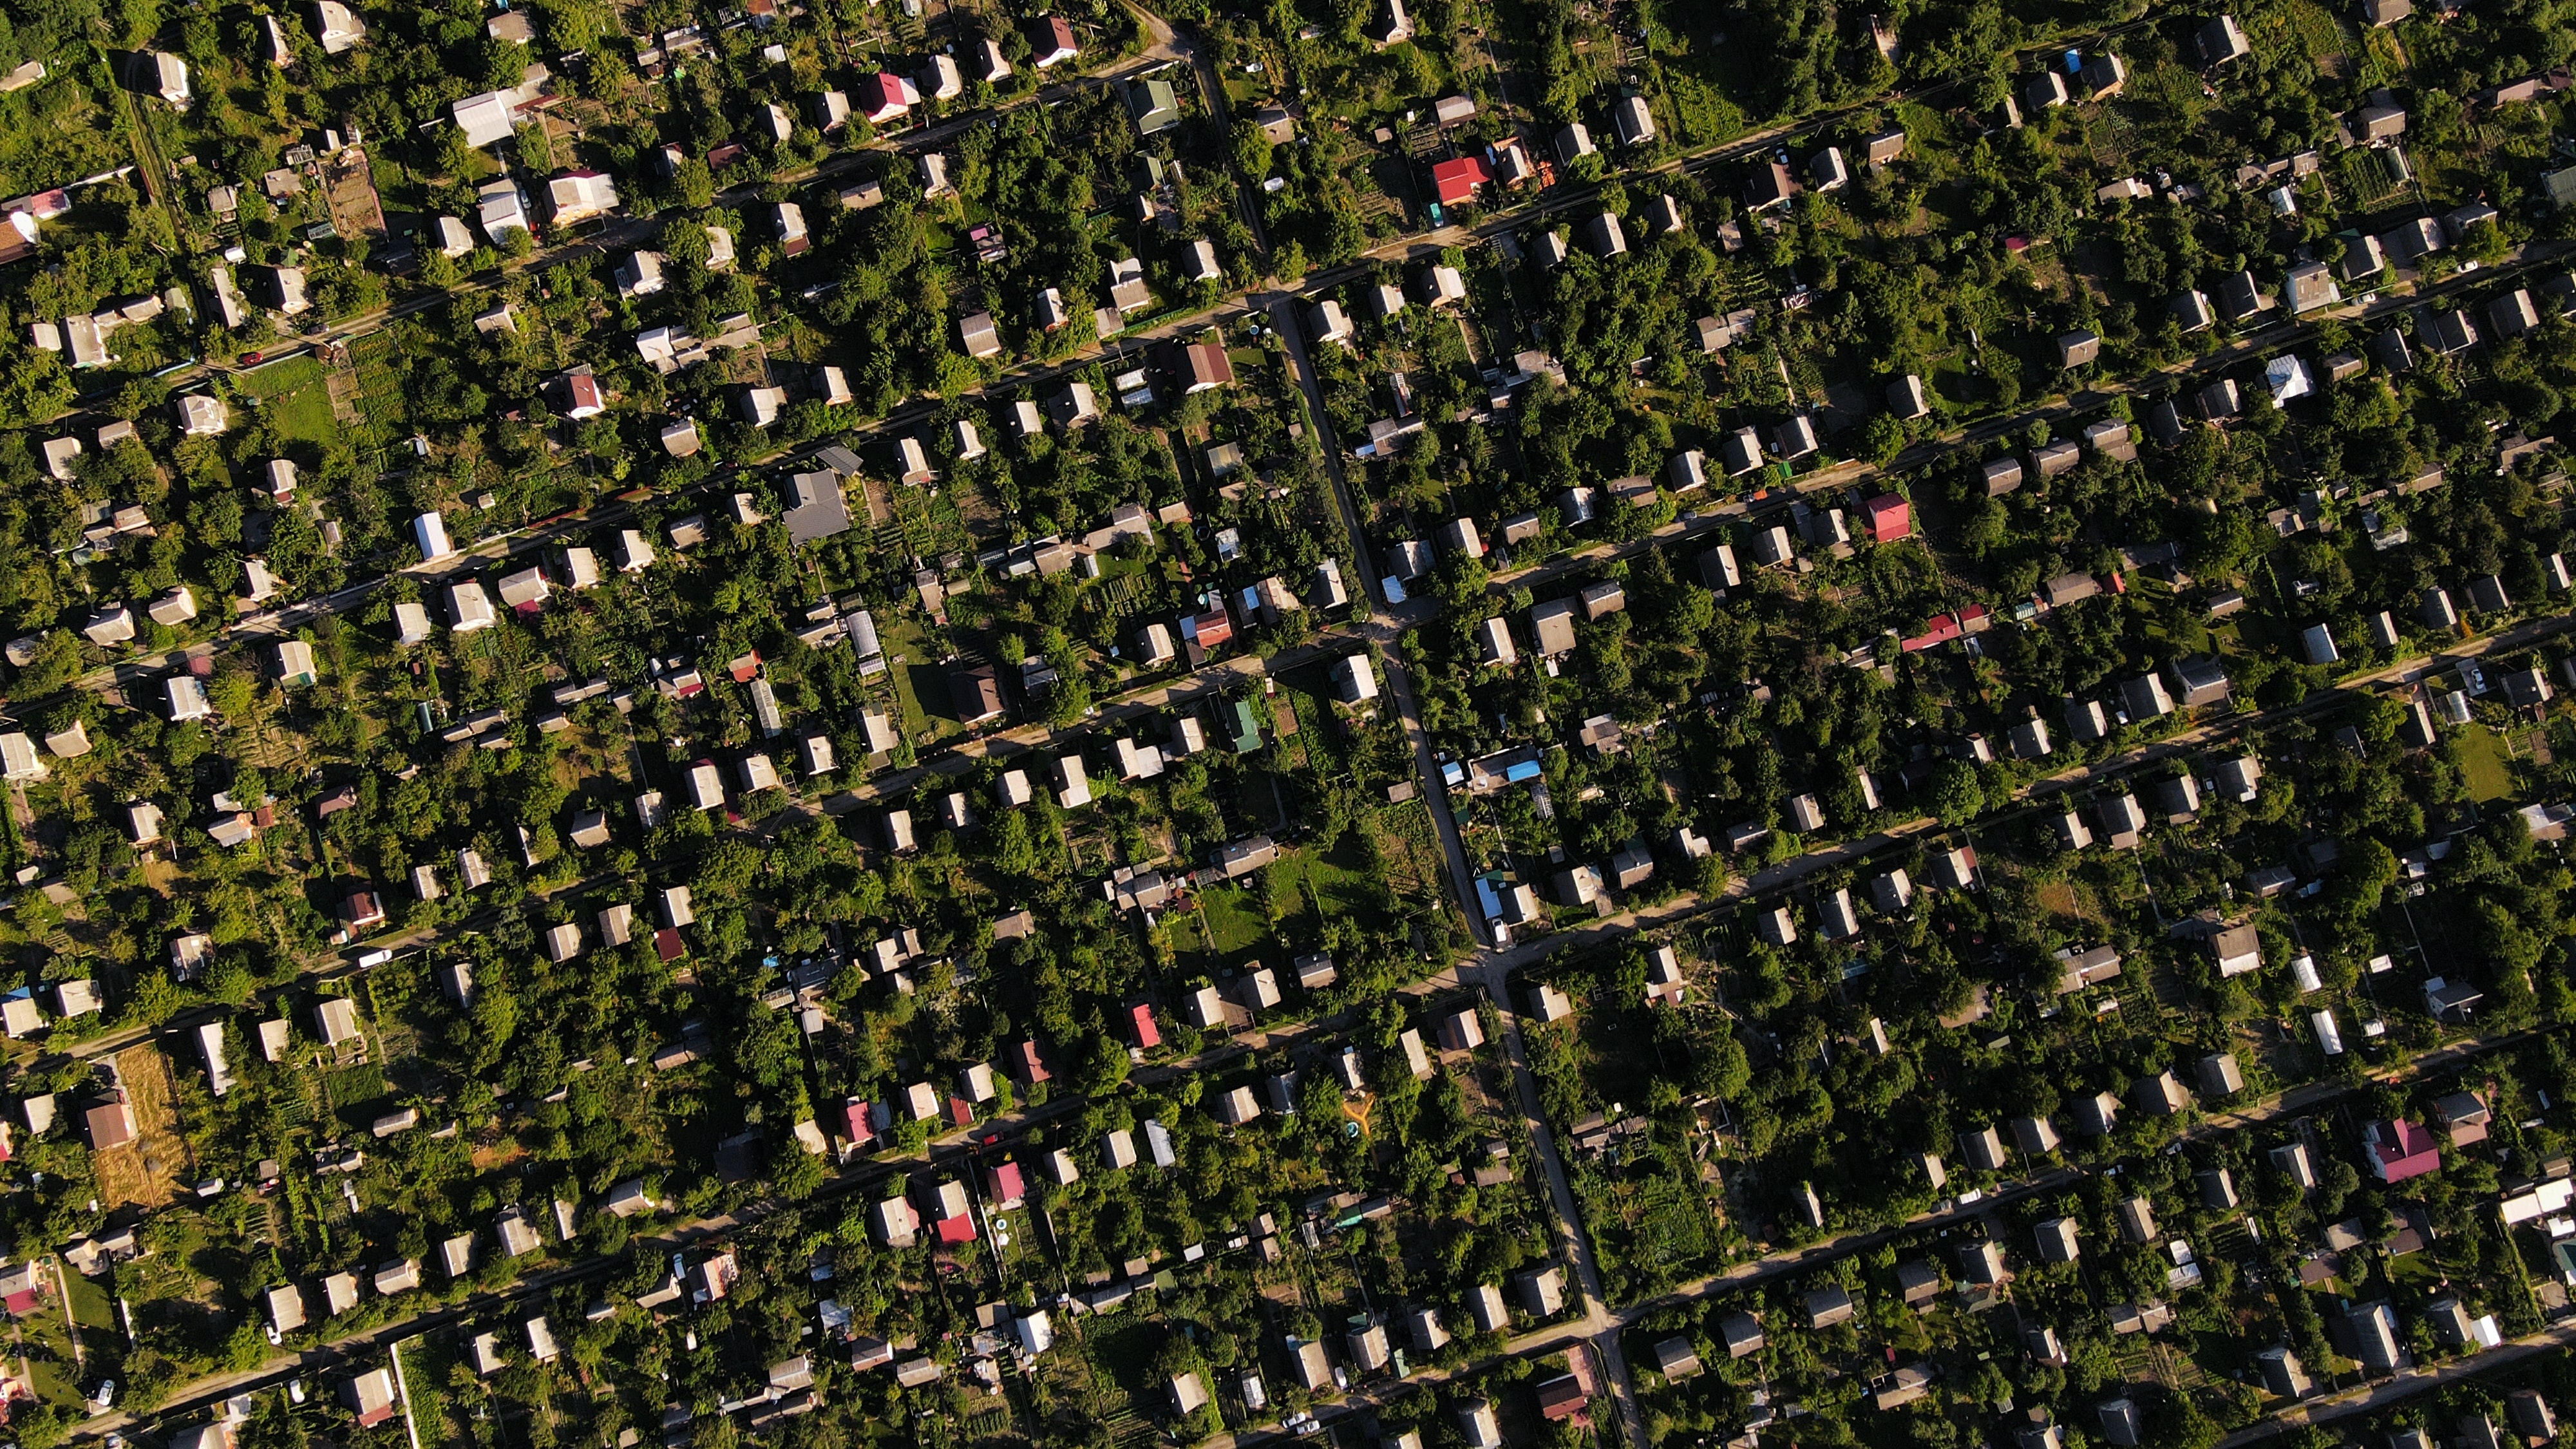 a large neighborhood, seen from above